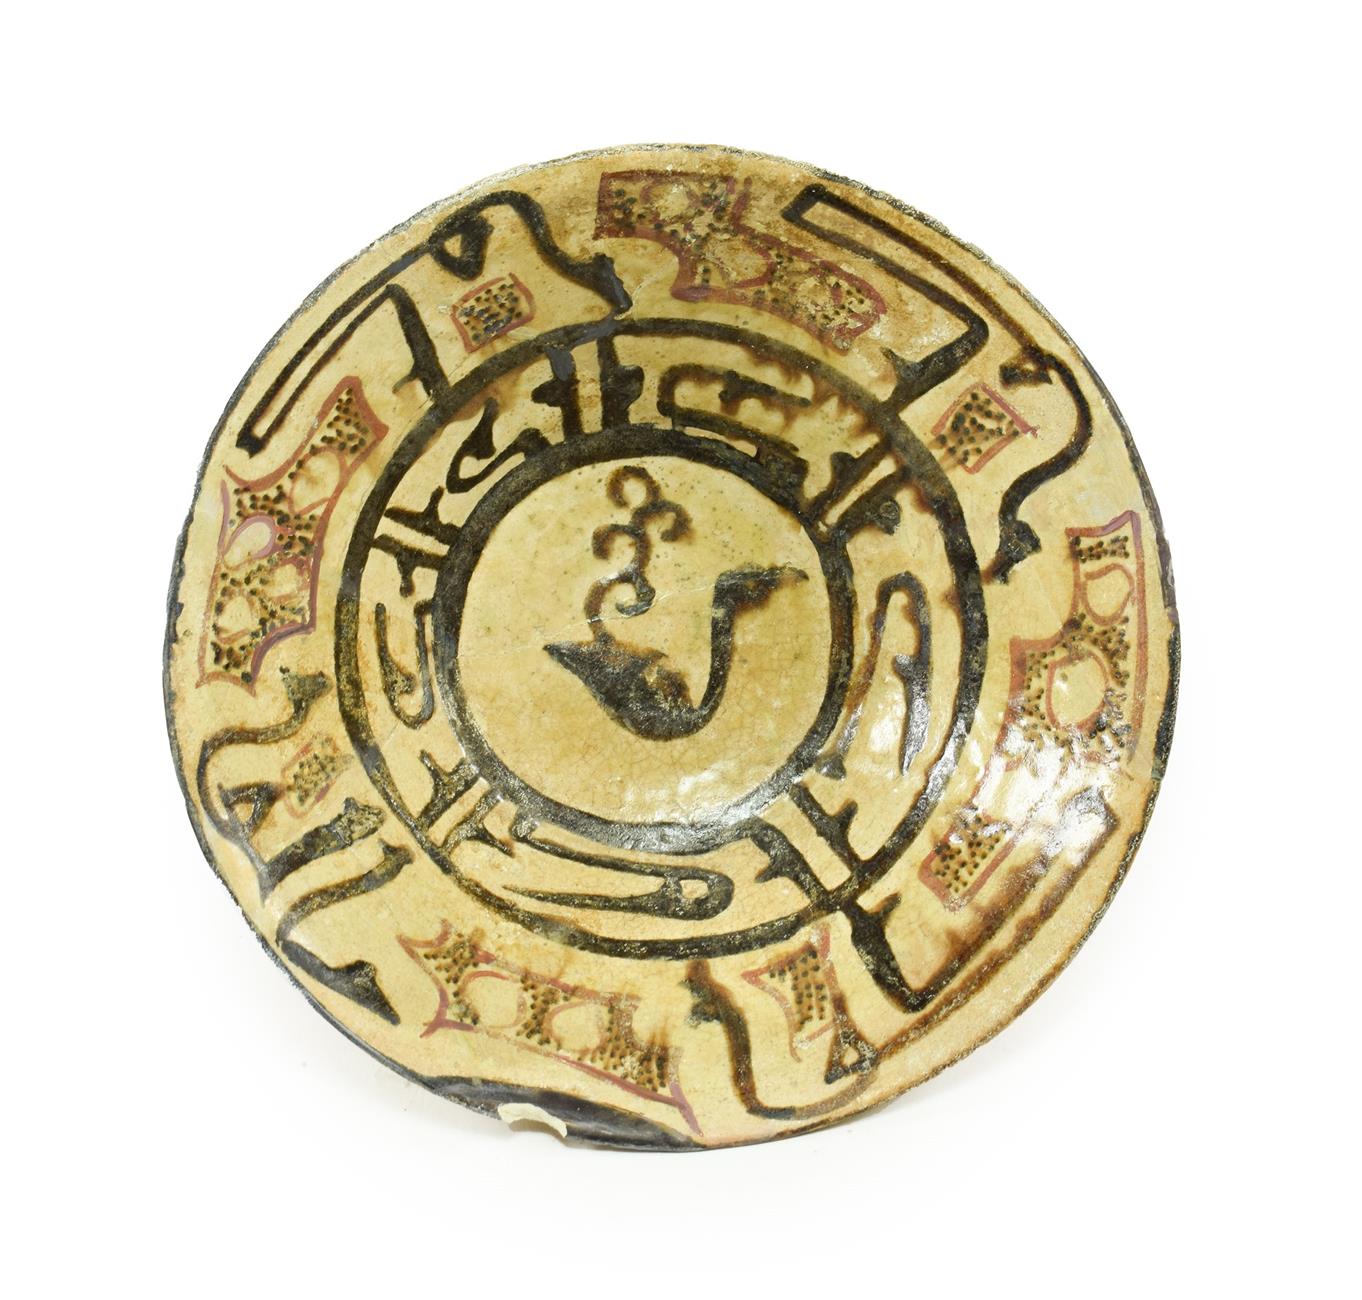 An Abbasid Painted Earthenware Bowl, probably Samarkand, 10th century, painted in manganese, red and